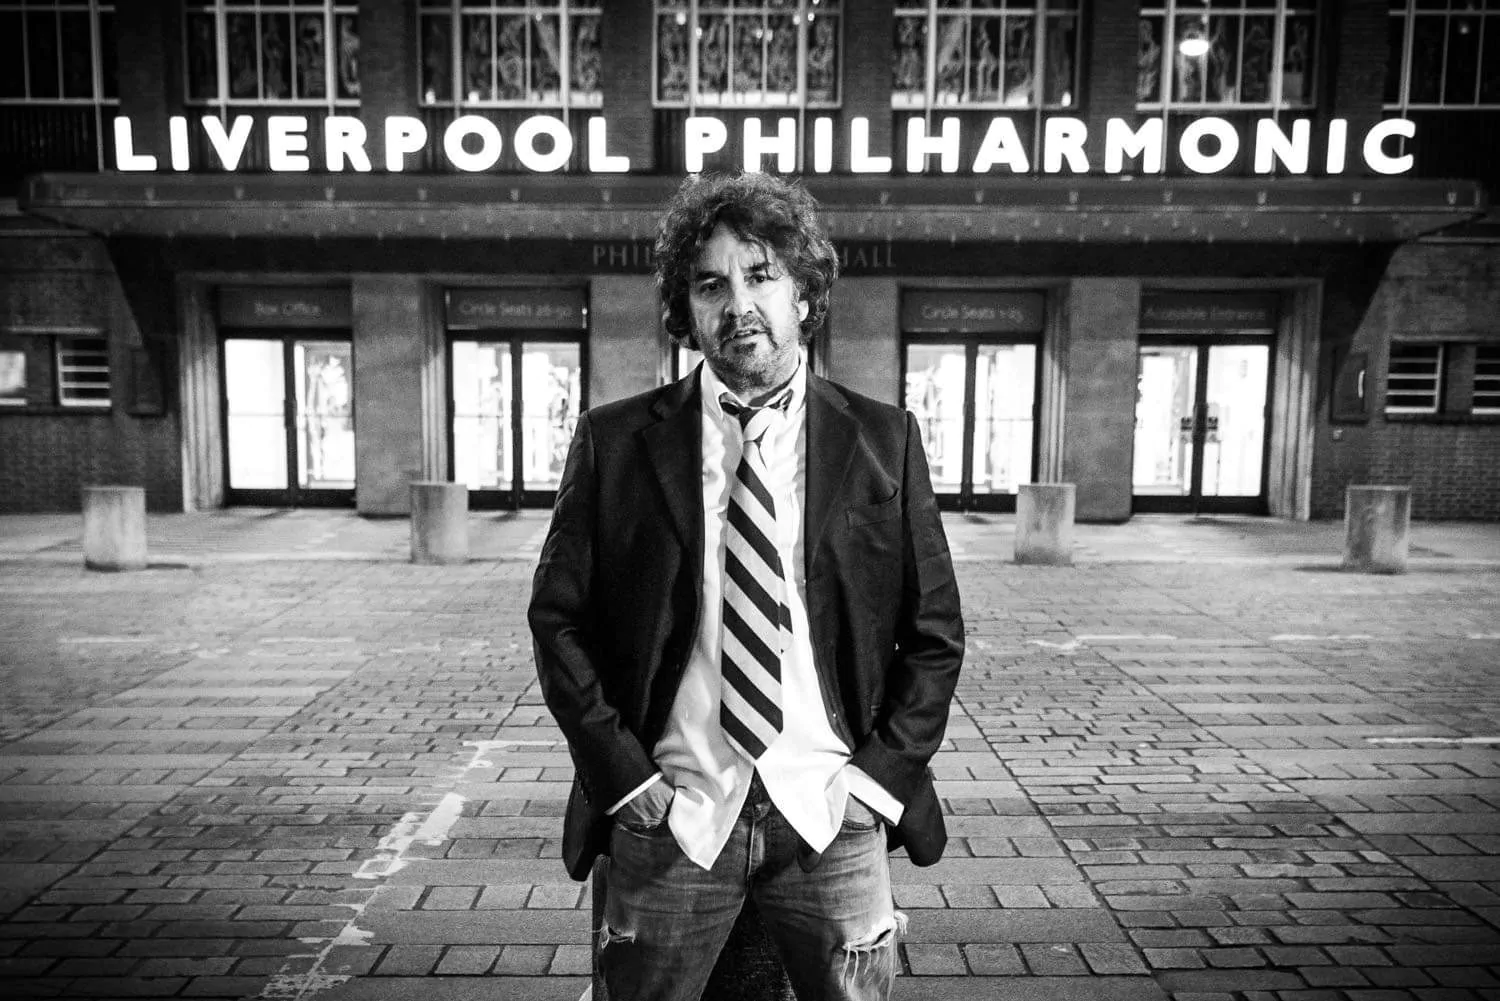 The famous IAN PROWSE & AMSTERDAM Christmas show is given green light